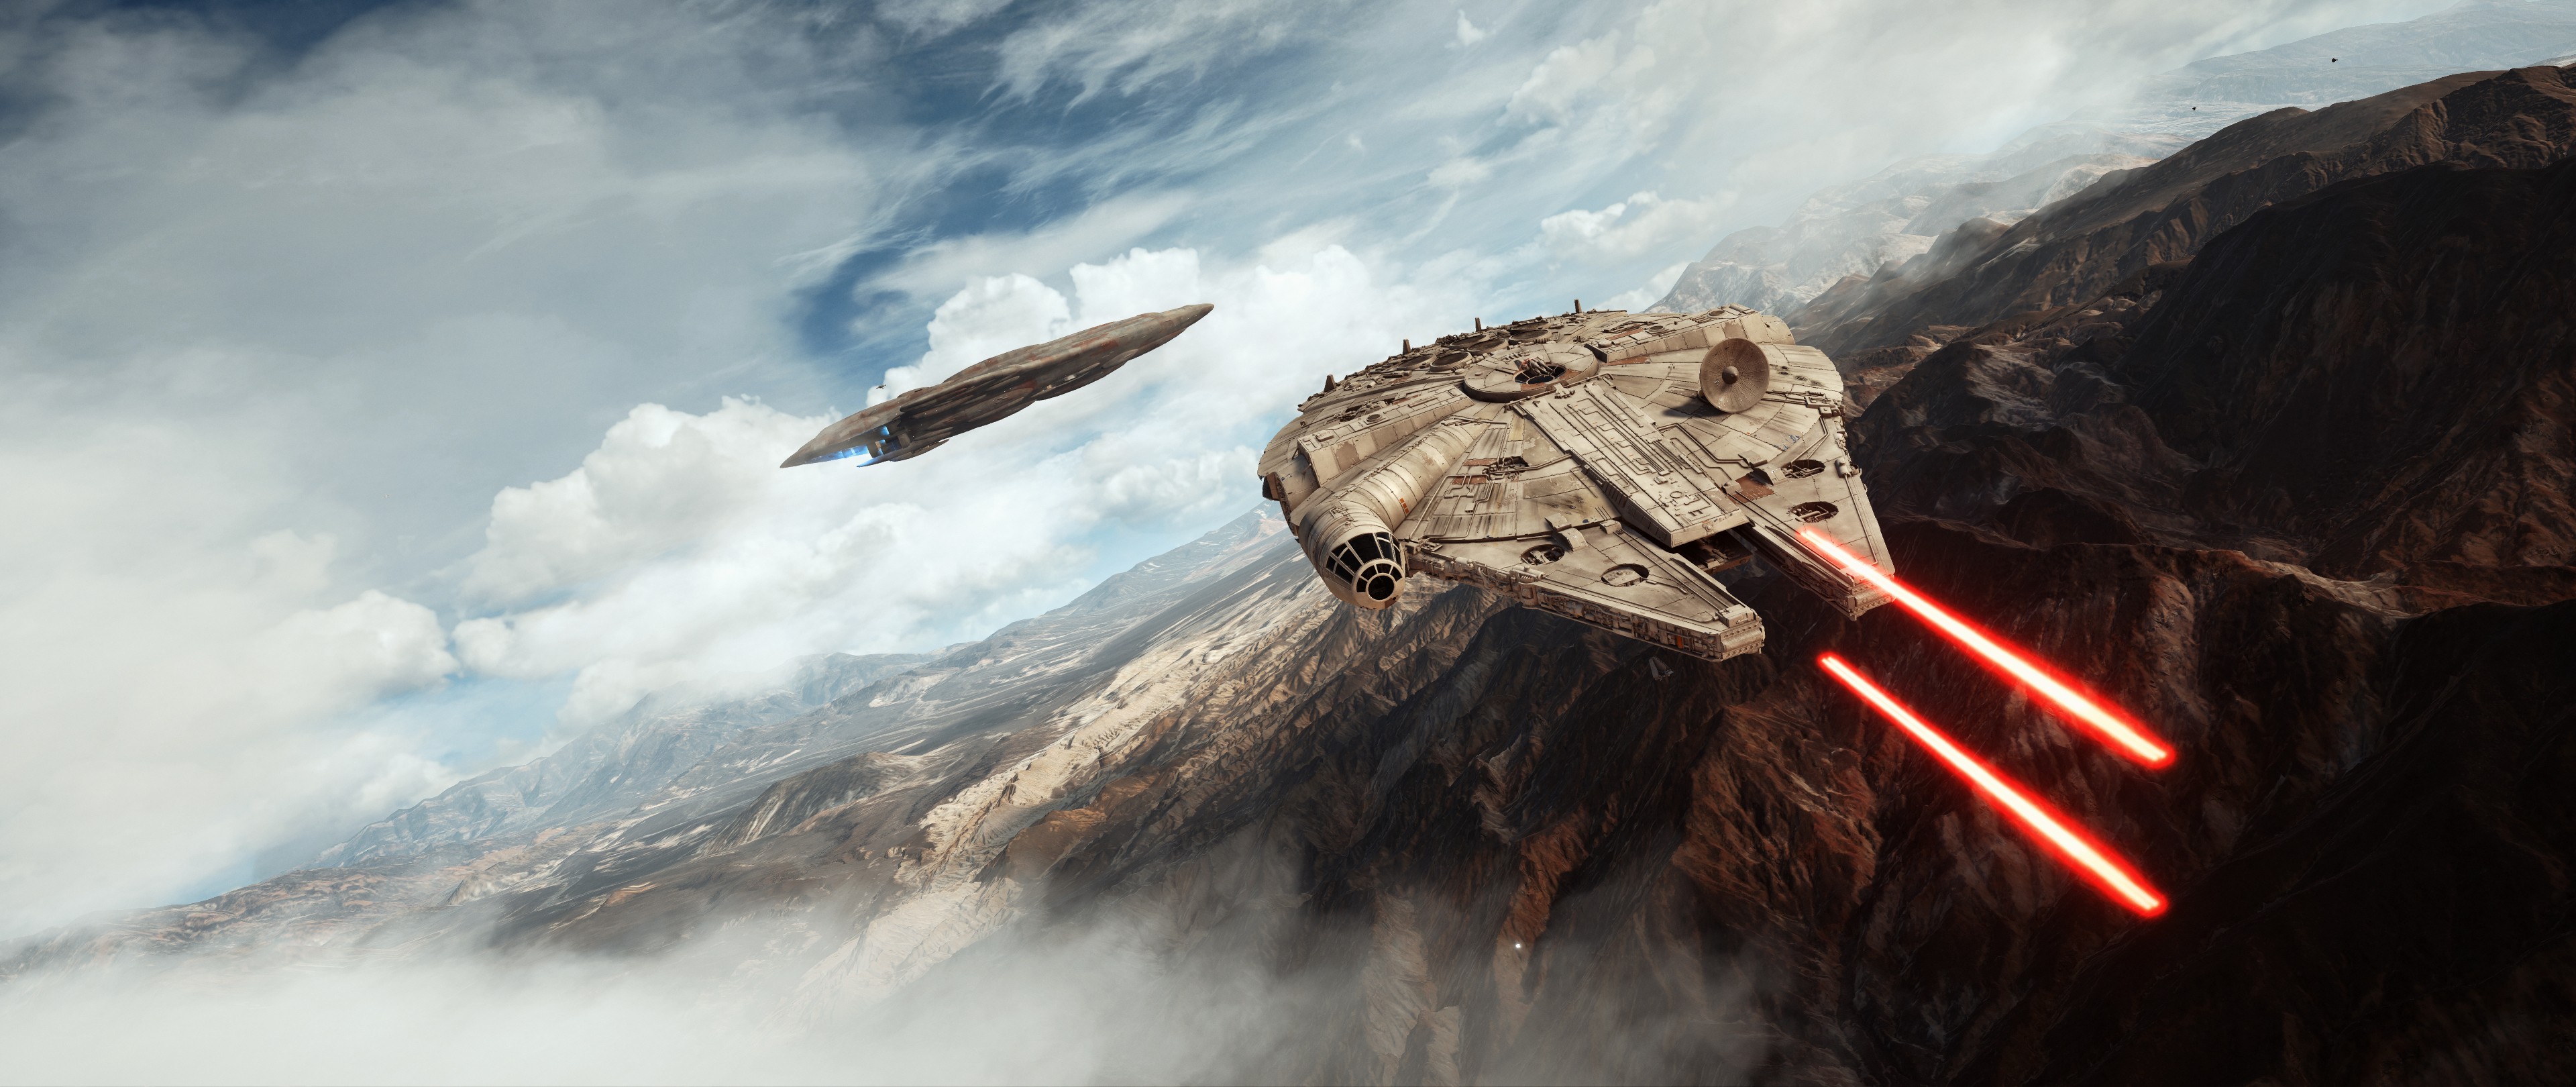 General 3840x1620 Millennium Falcon Star Wars: Battlefront video games Star Wars PC gaming video game art science fiction